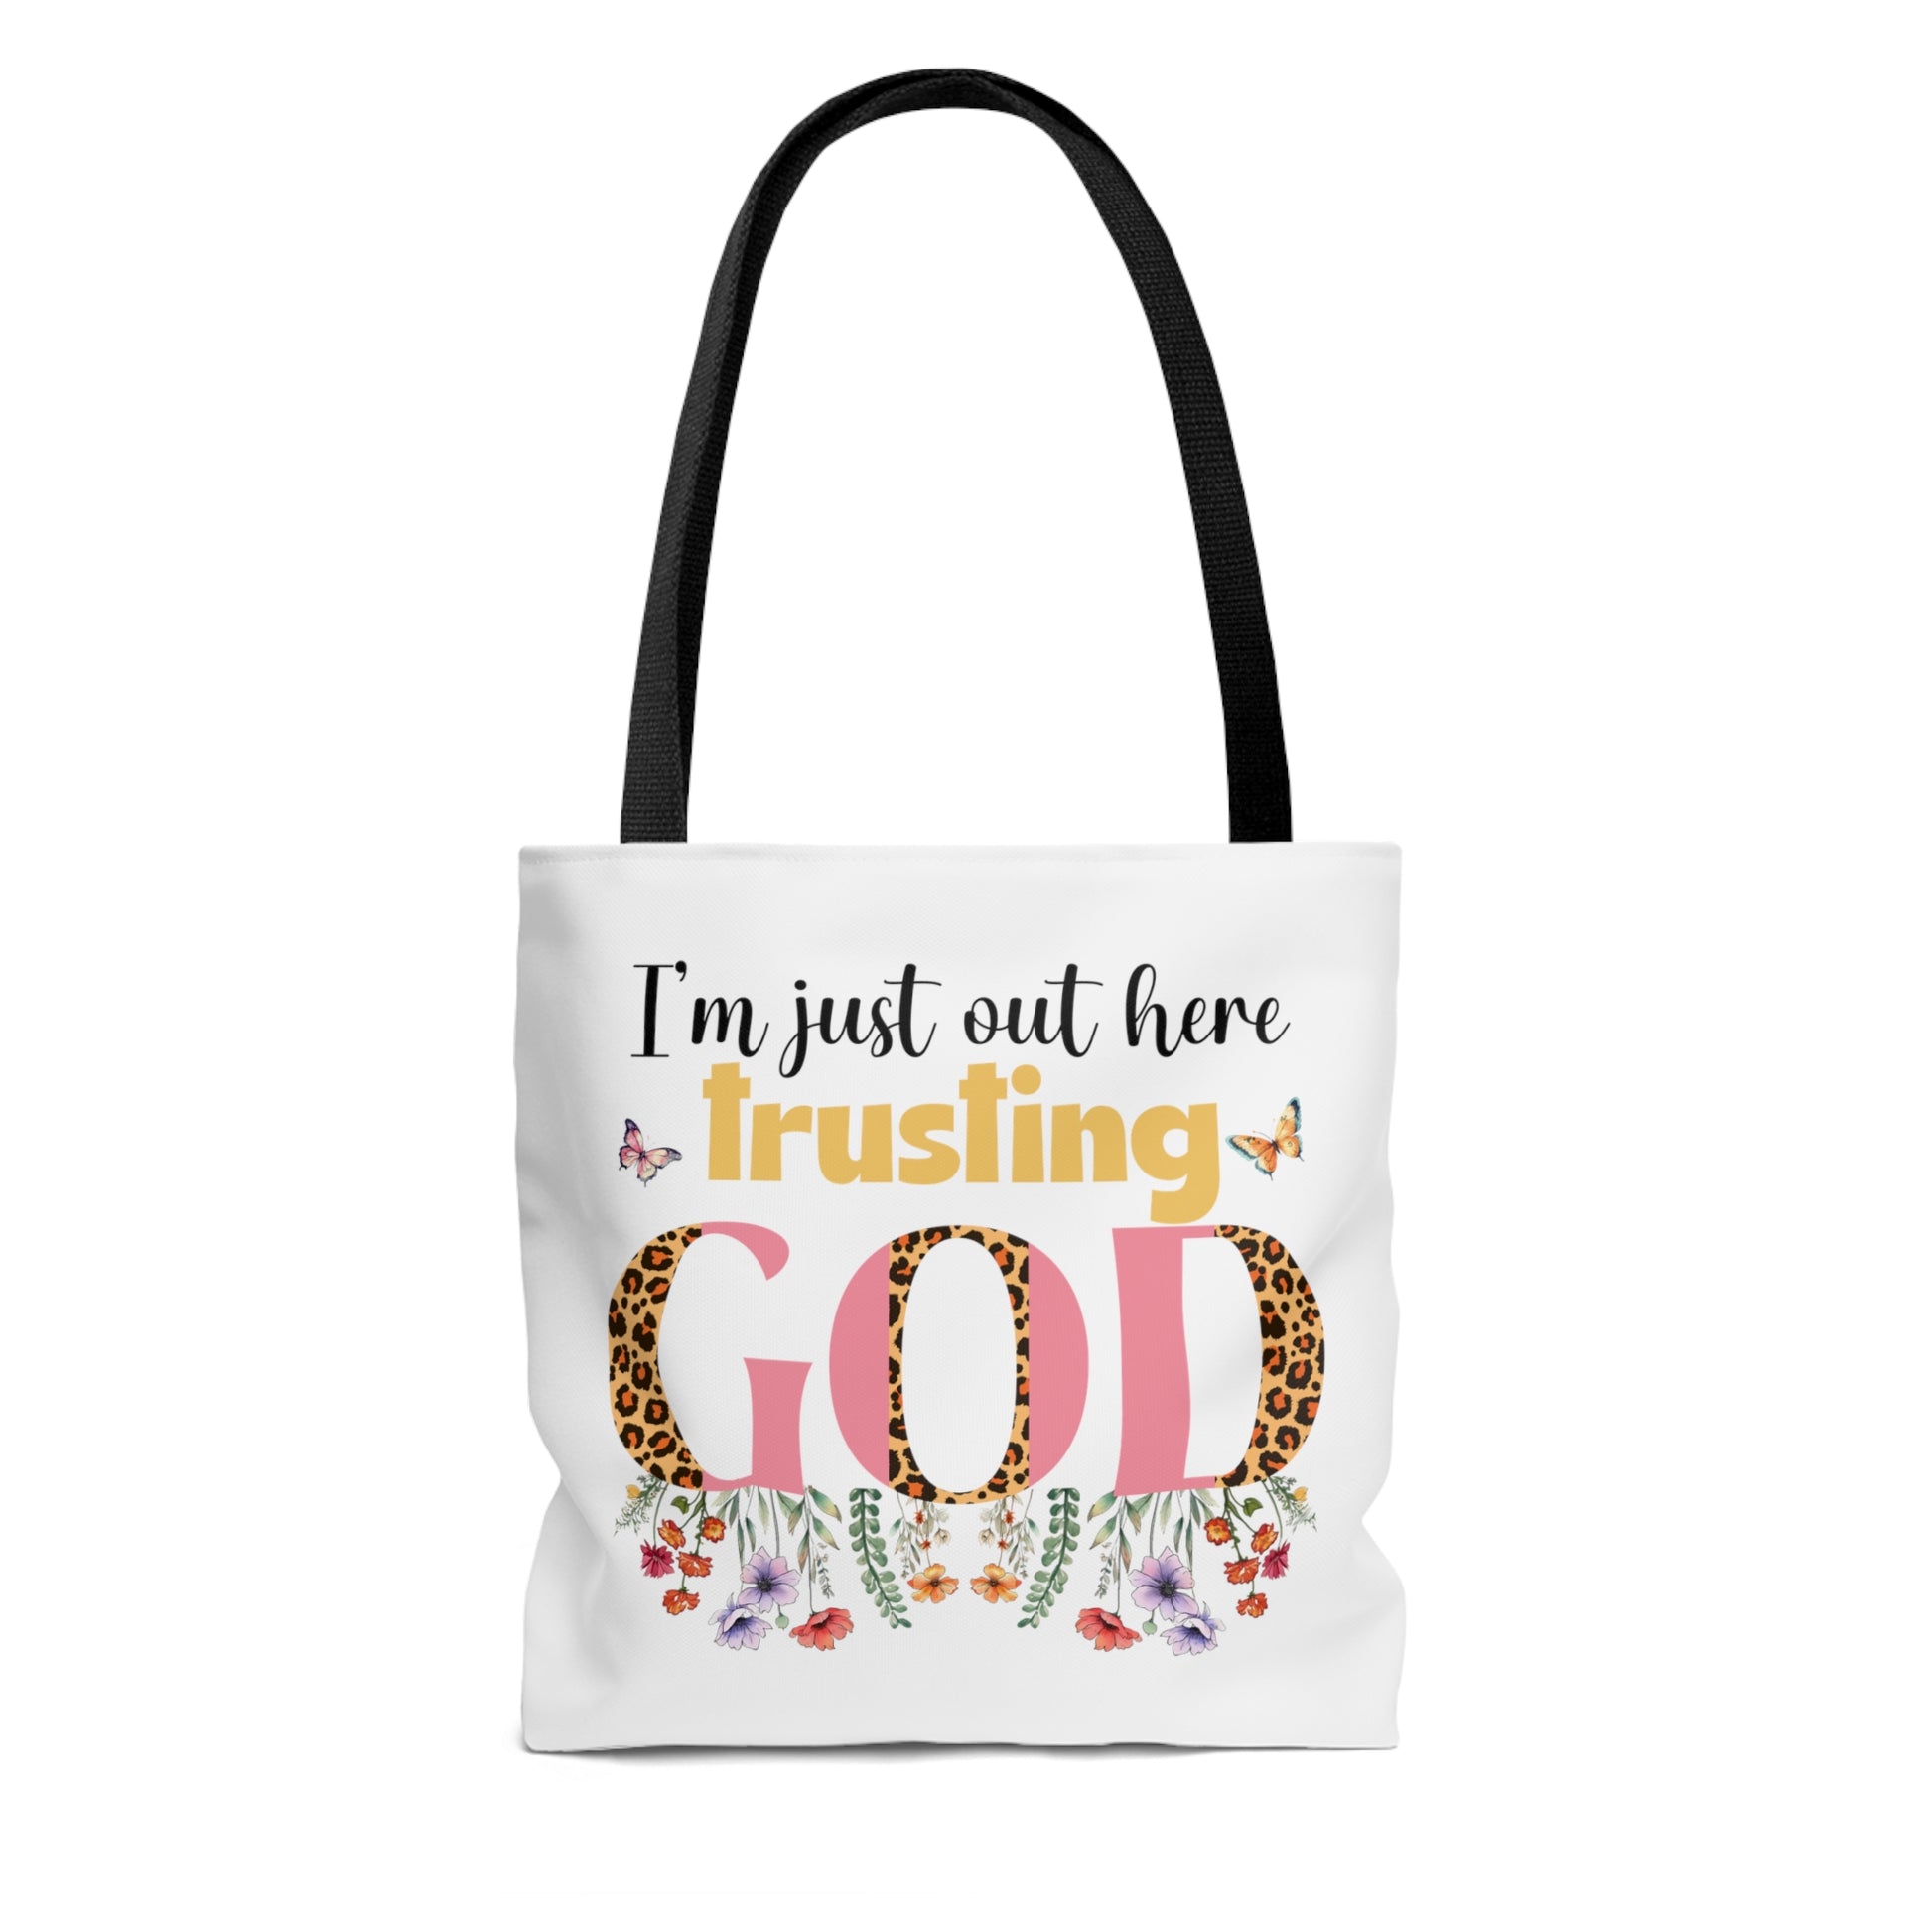 I'm Just Out Here Trusting God, Christian Tote Bag